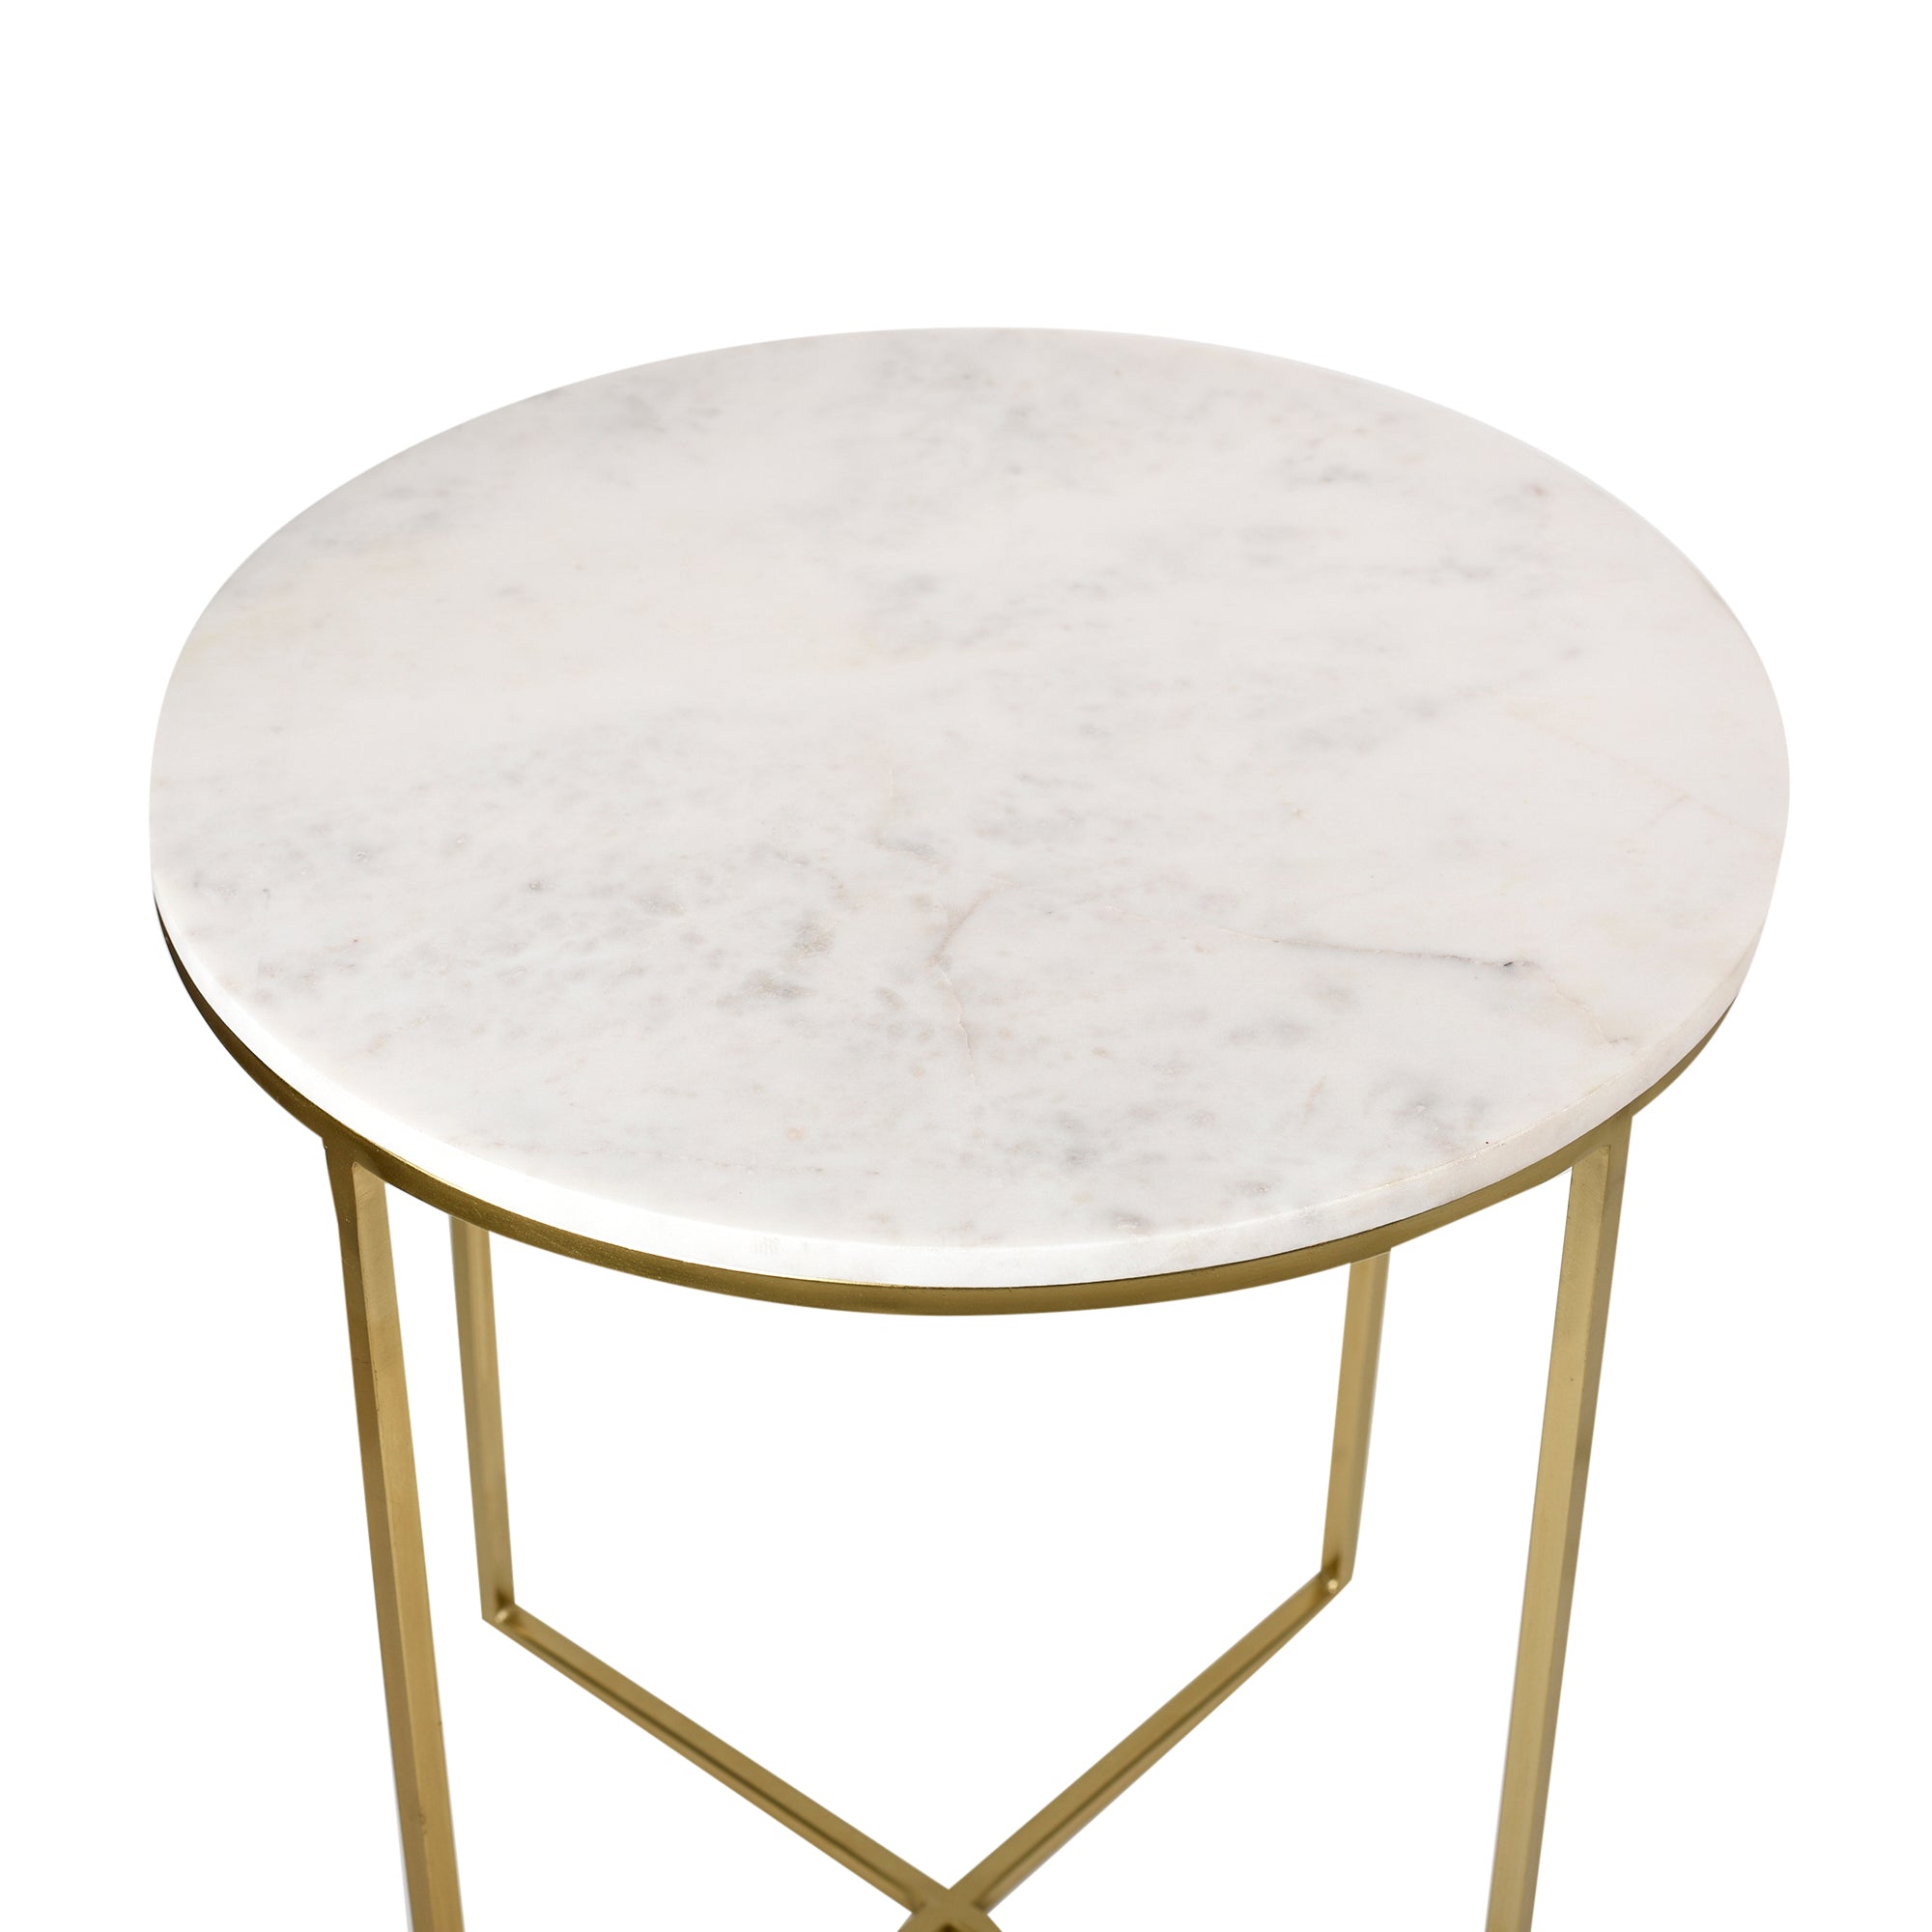 Round Marble Top Metal End Table 21 inches Tall